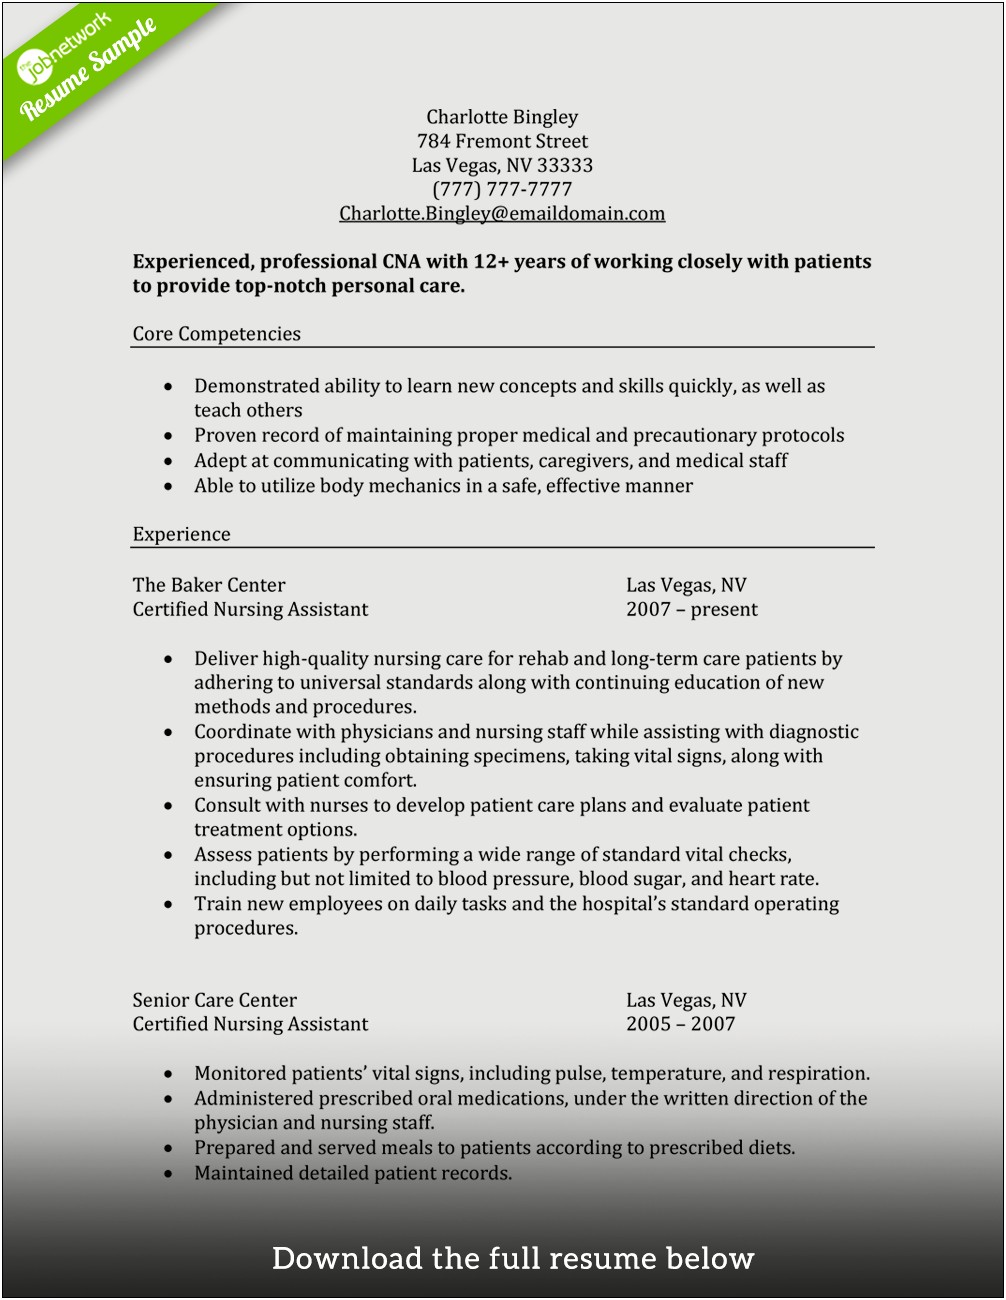 Resume Objective Examples For Certified Nursing Assistant